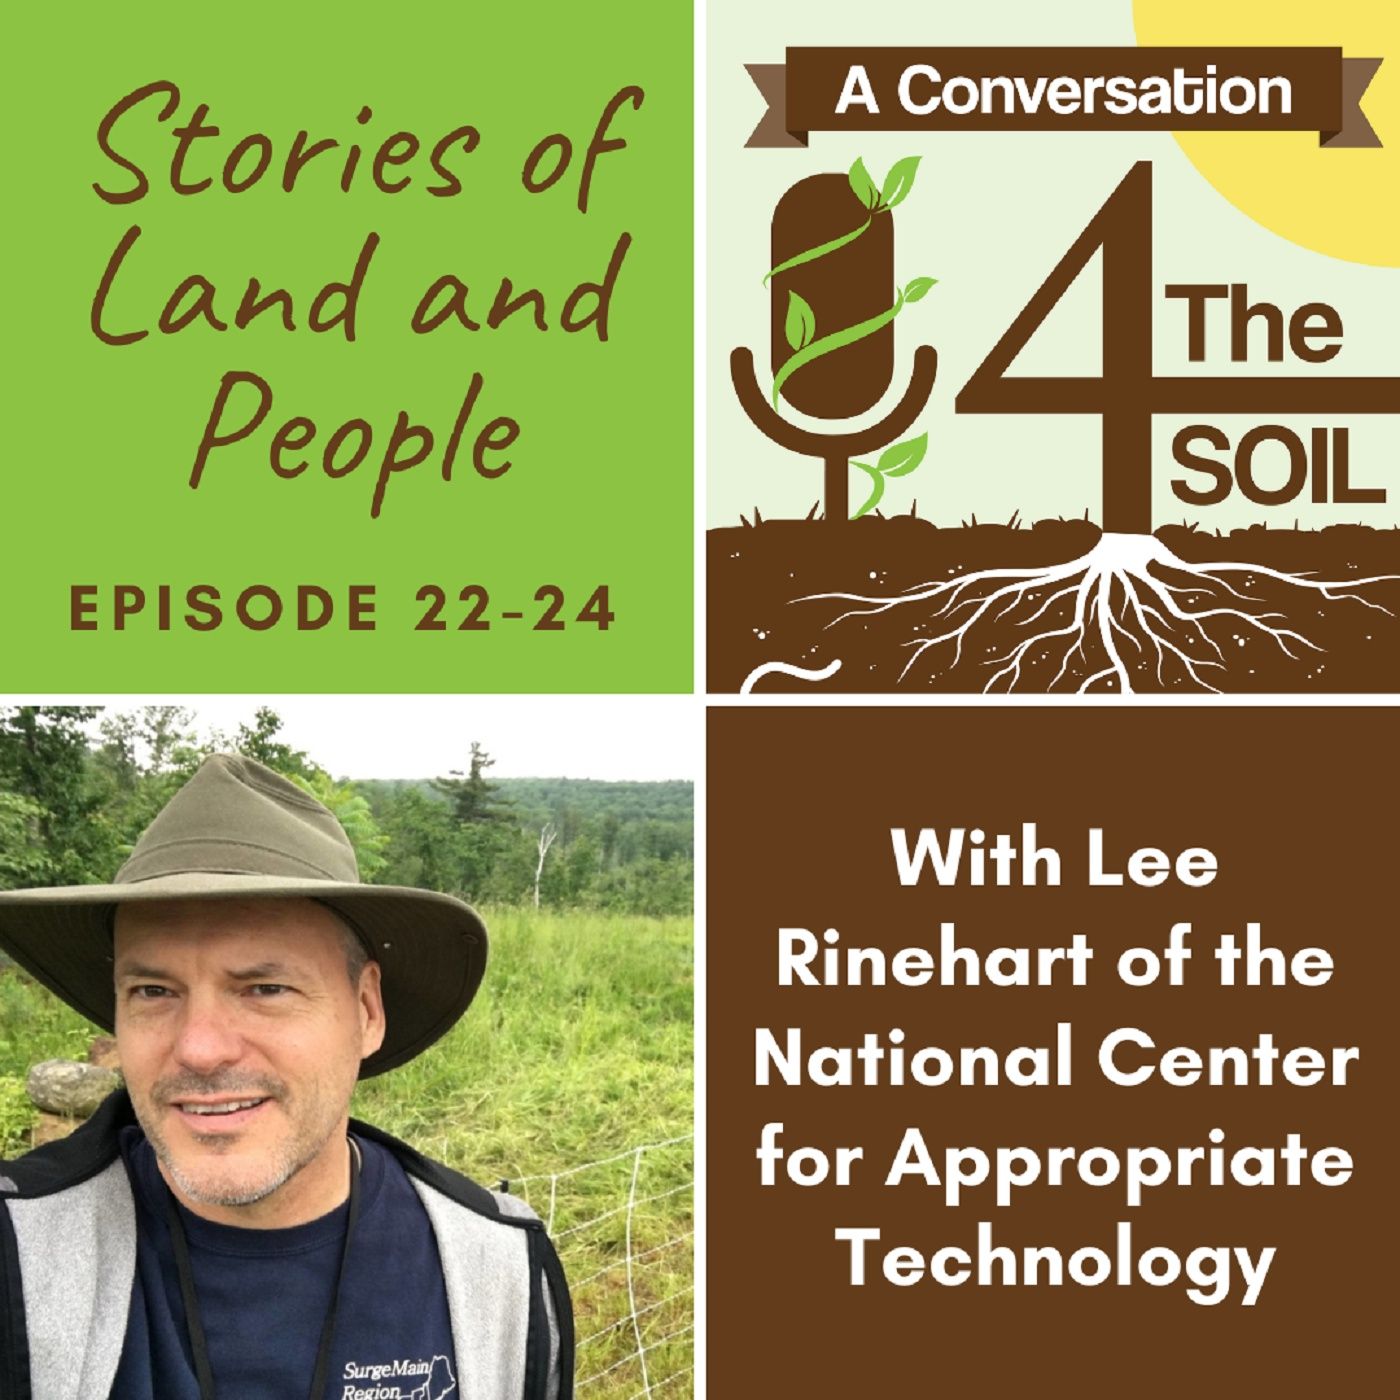 Episode 22 - 24: Stories of Land and People with Lee Rinehart of the National Center for Appropriate Technology (NCAT) Part II